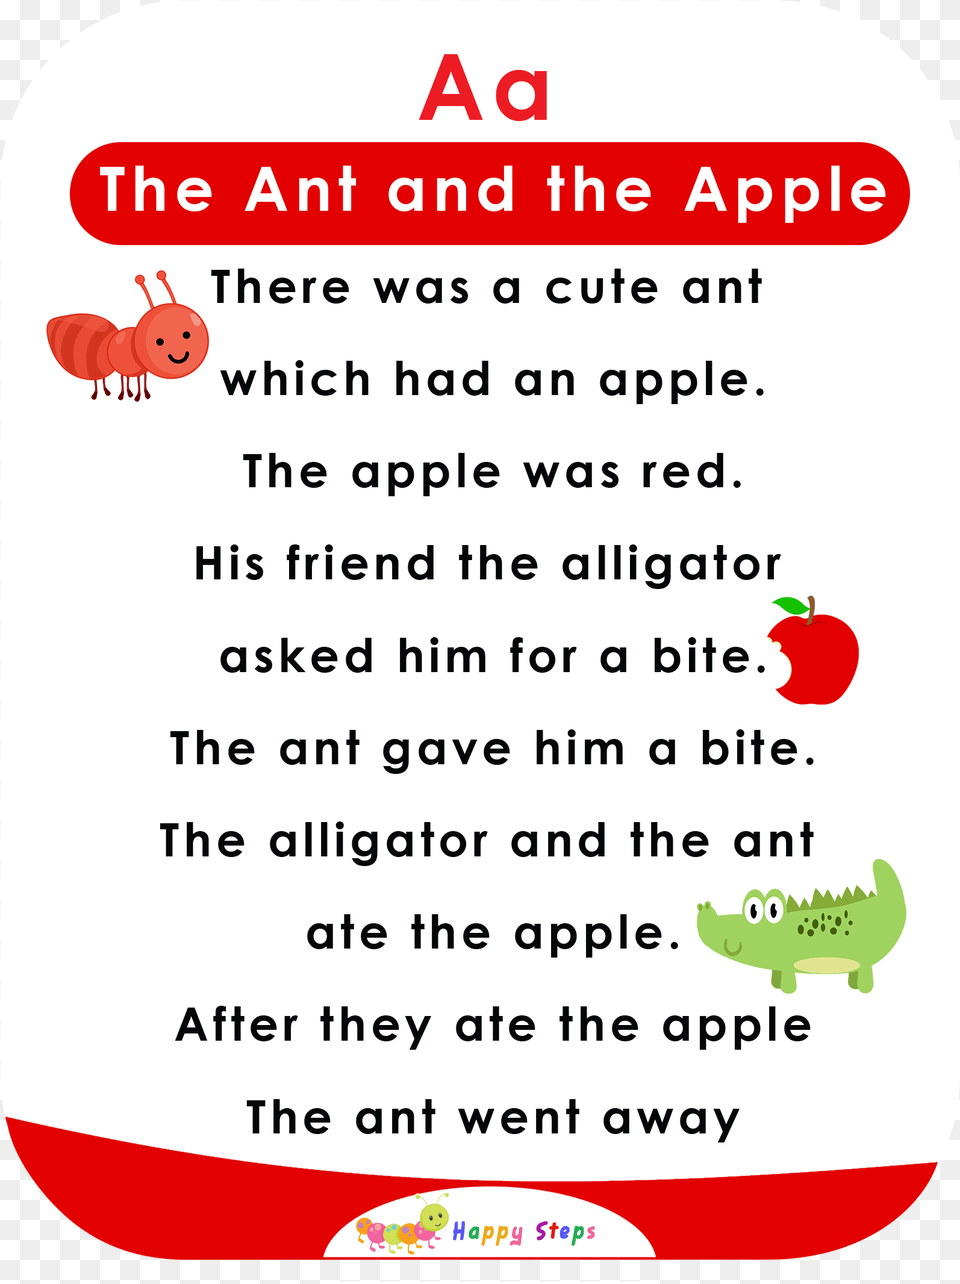 The Ant And The Apple Alphabet Story With Moral, Text, Animal, Reptile, Sea Life Png Image